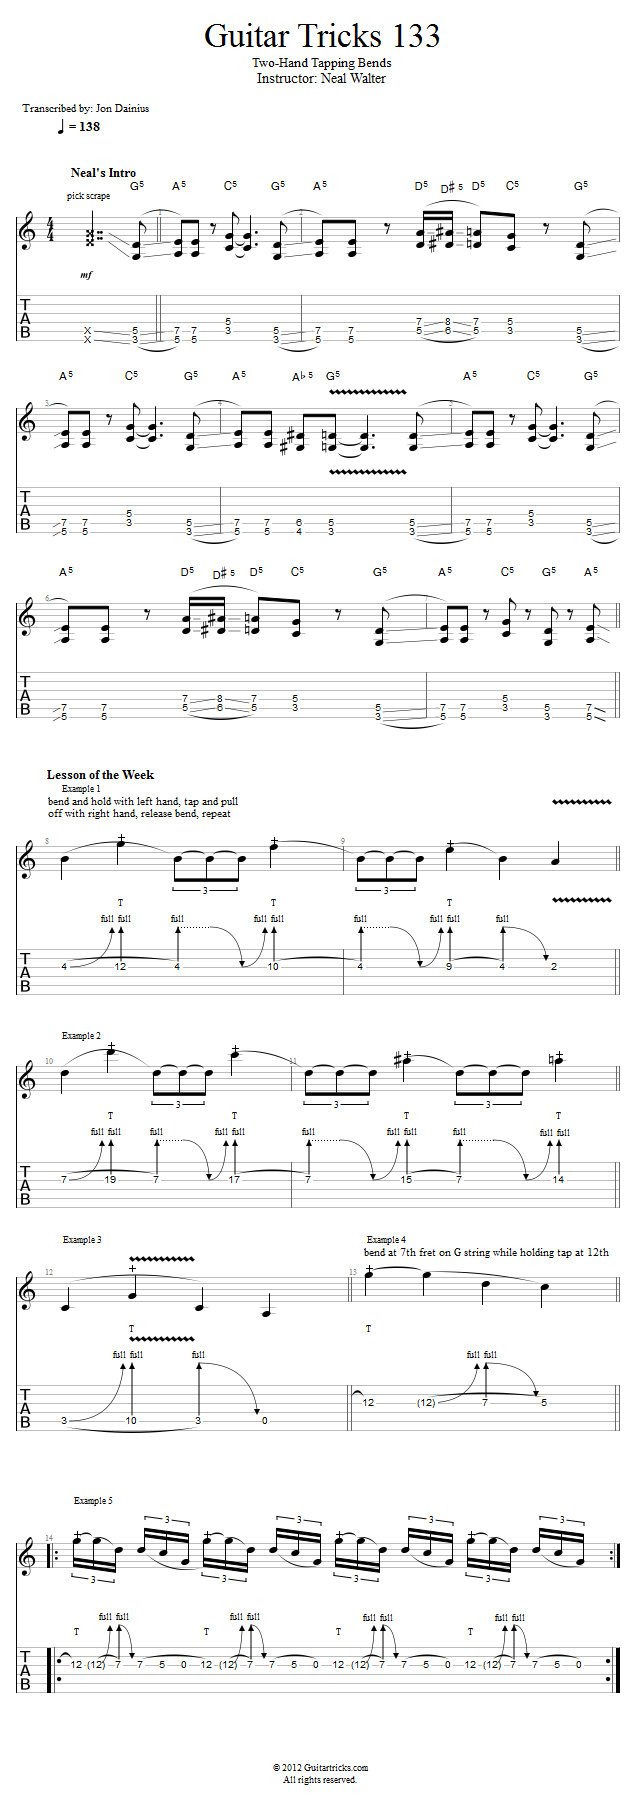 Guitar Tricks 133: Two-Hand Tapping Bends song notation